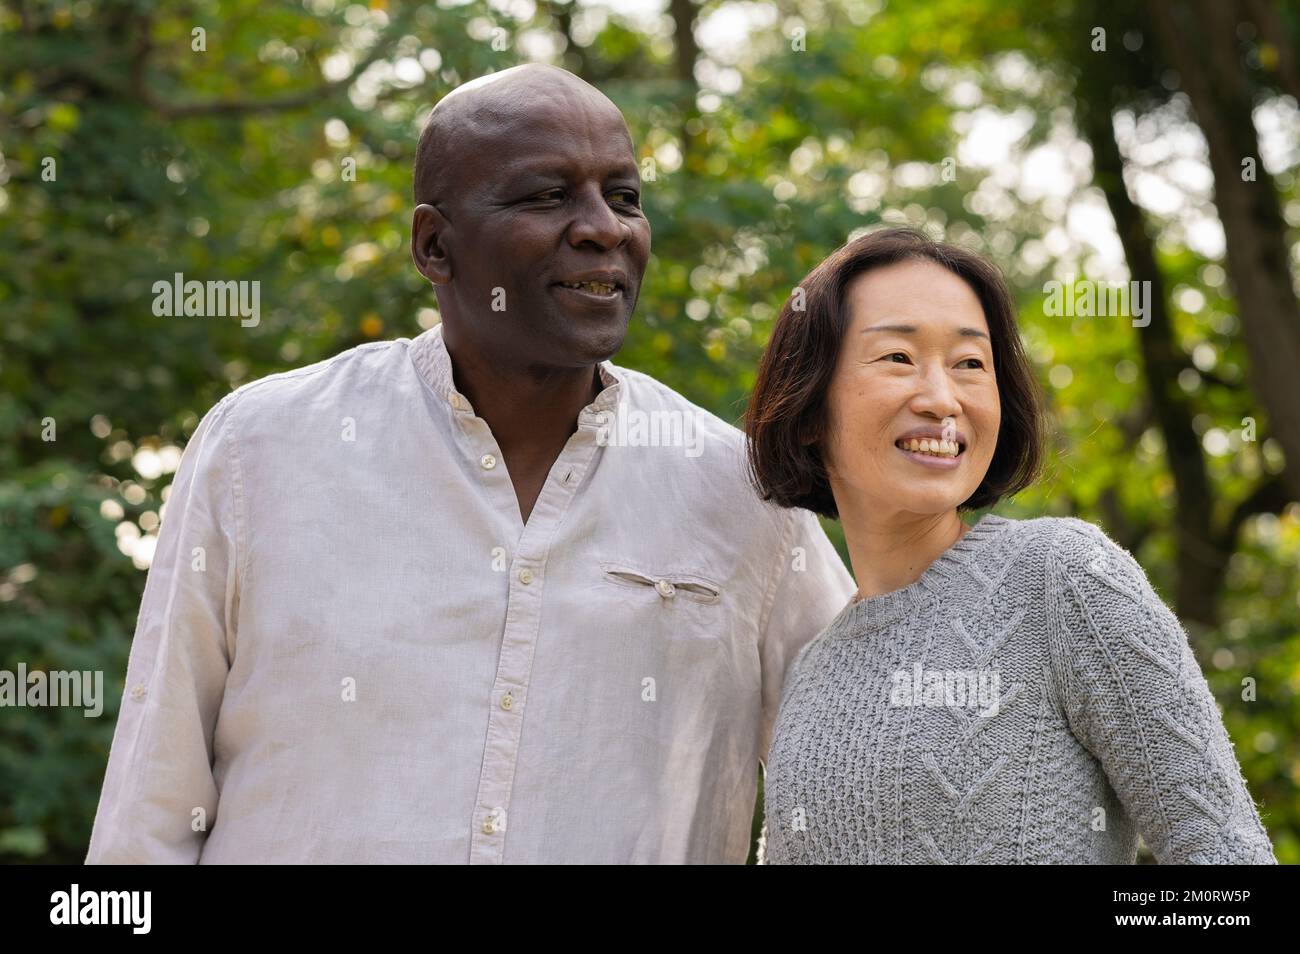 Middle-aged diverse couple hanging out inpublic park Stock Photo